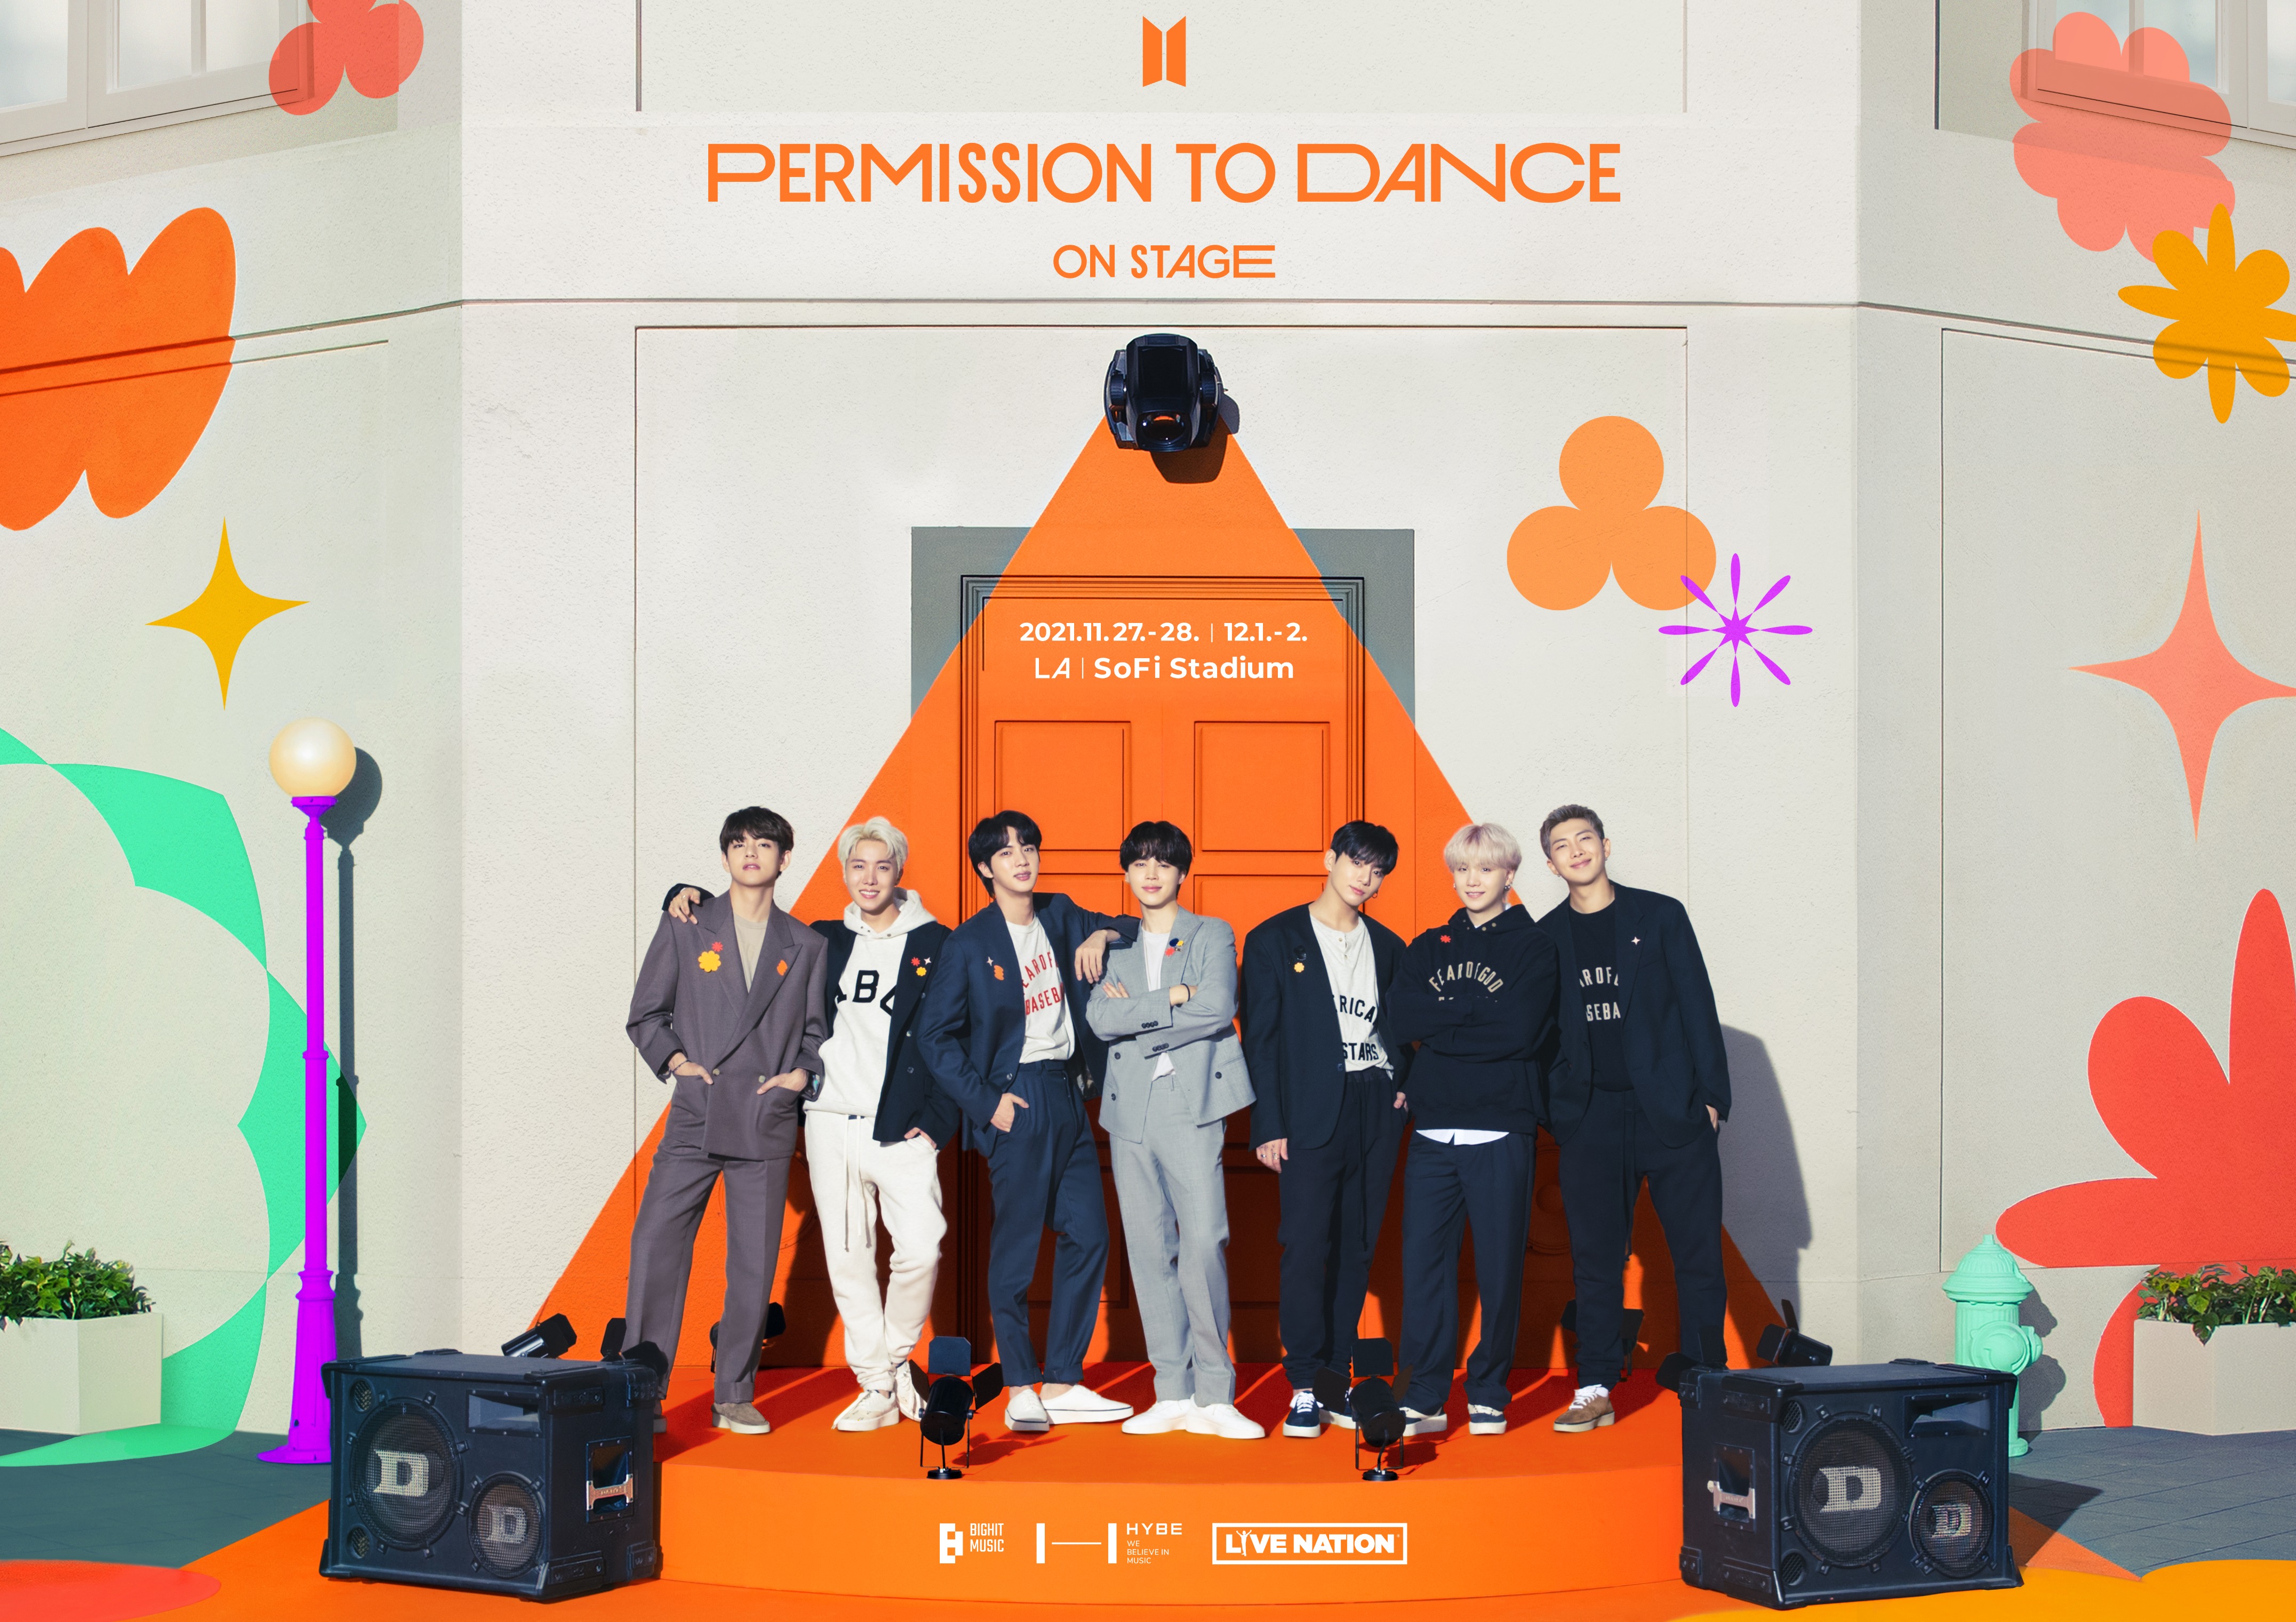 BTS Permission to Dance on Stage Concert Teaser Photos (HD/HQ)